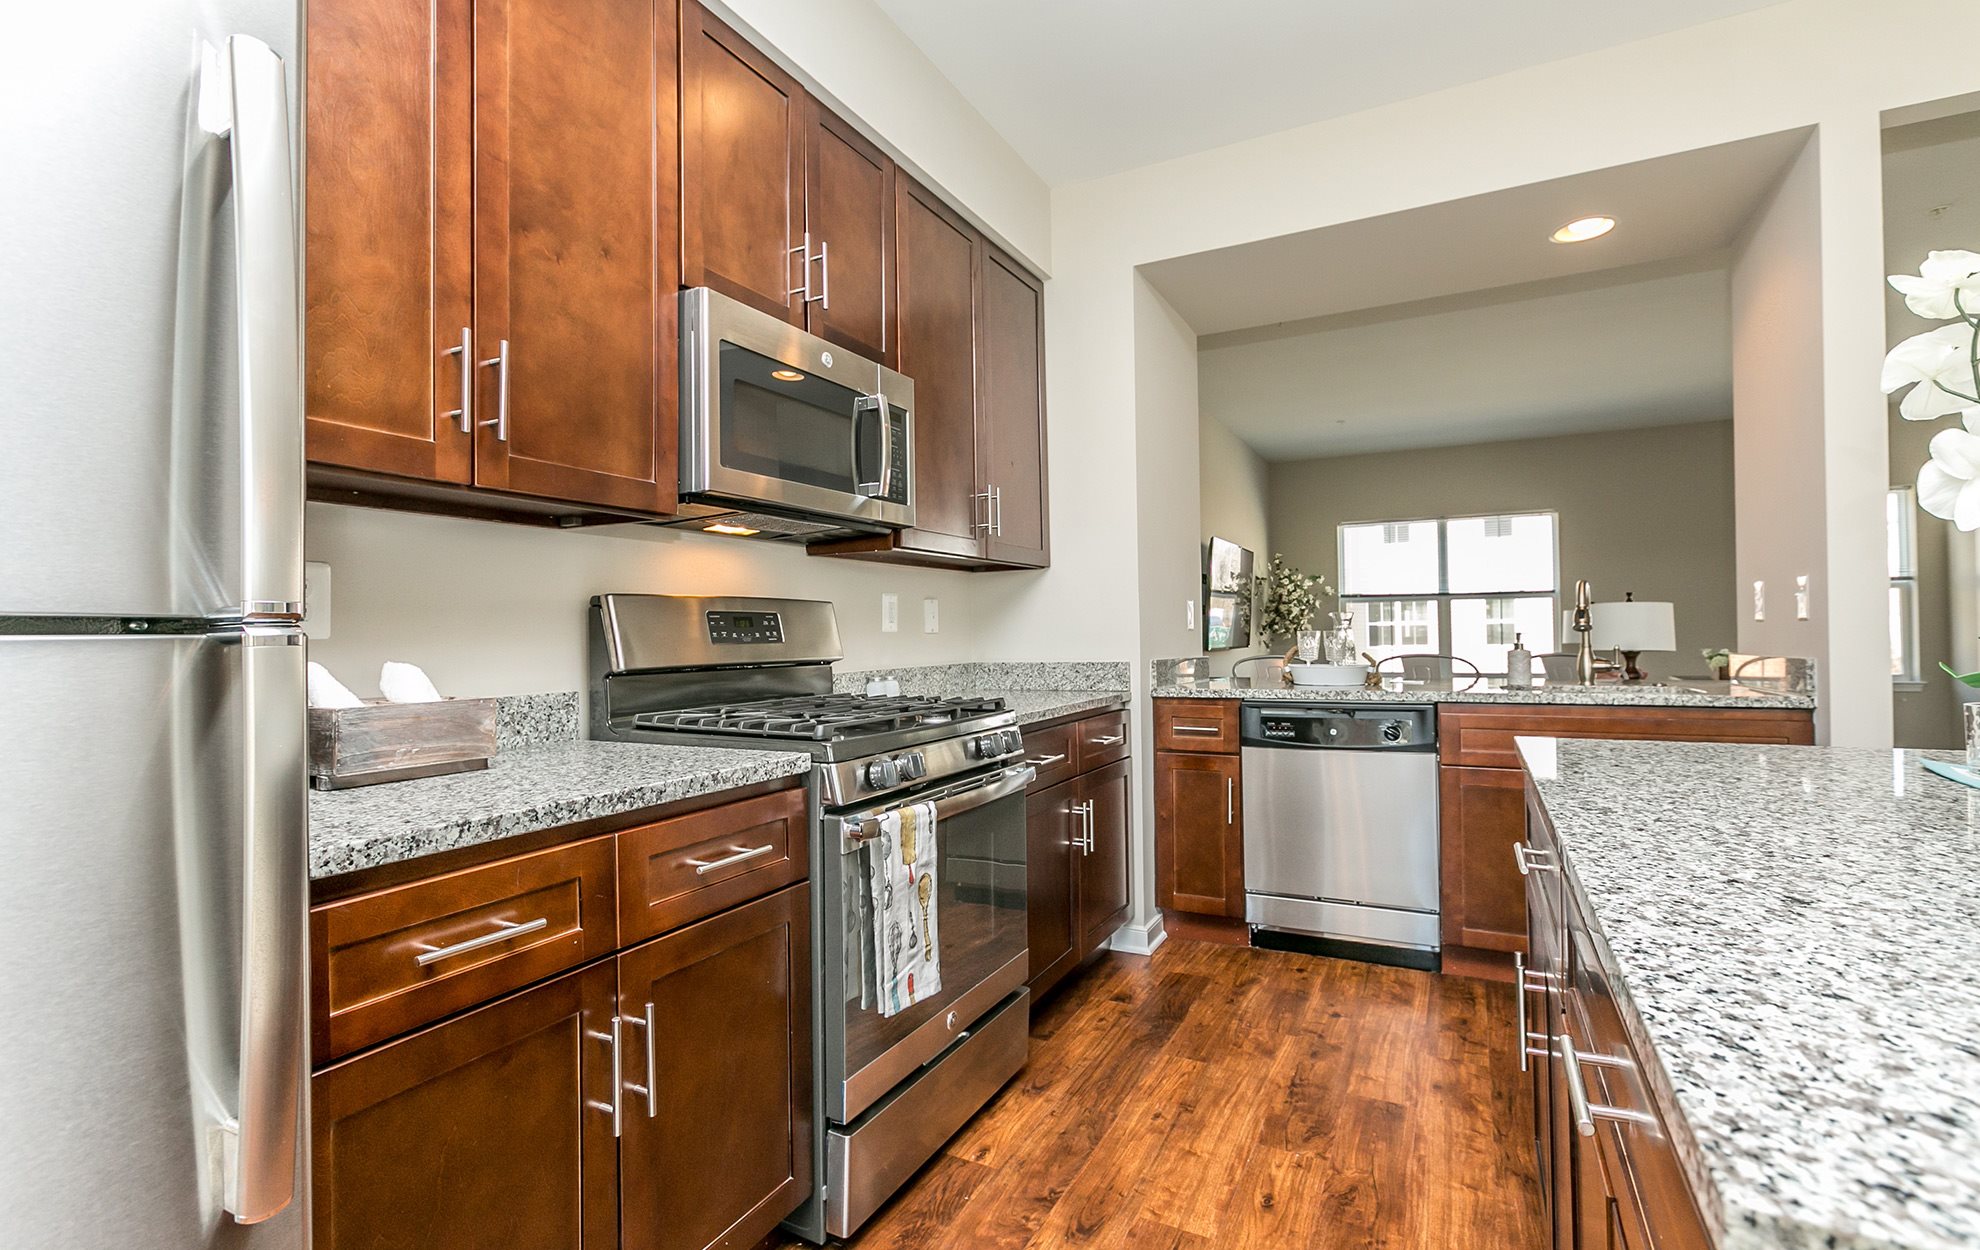 Kitchen at Townes at Pine Orchard Apartments Townes at Pine Orchard Ellicott City (844)484-3557